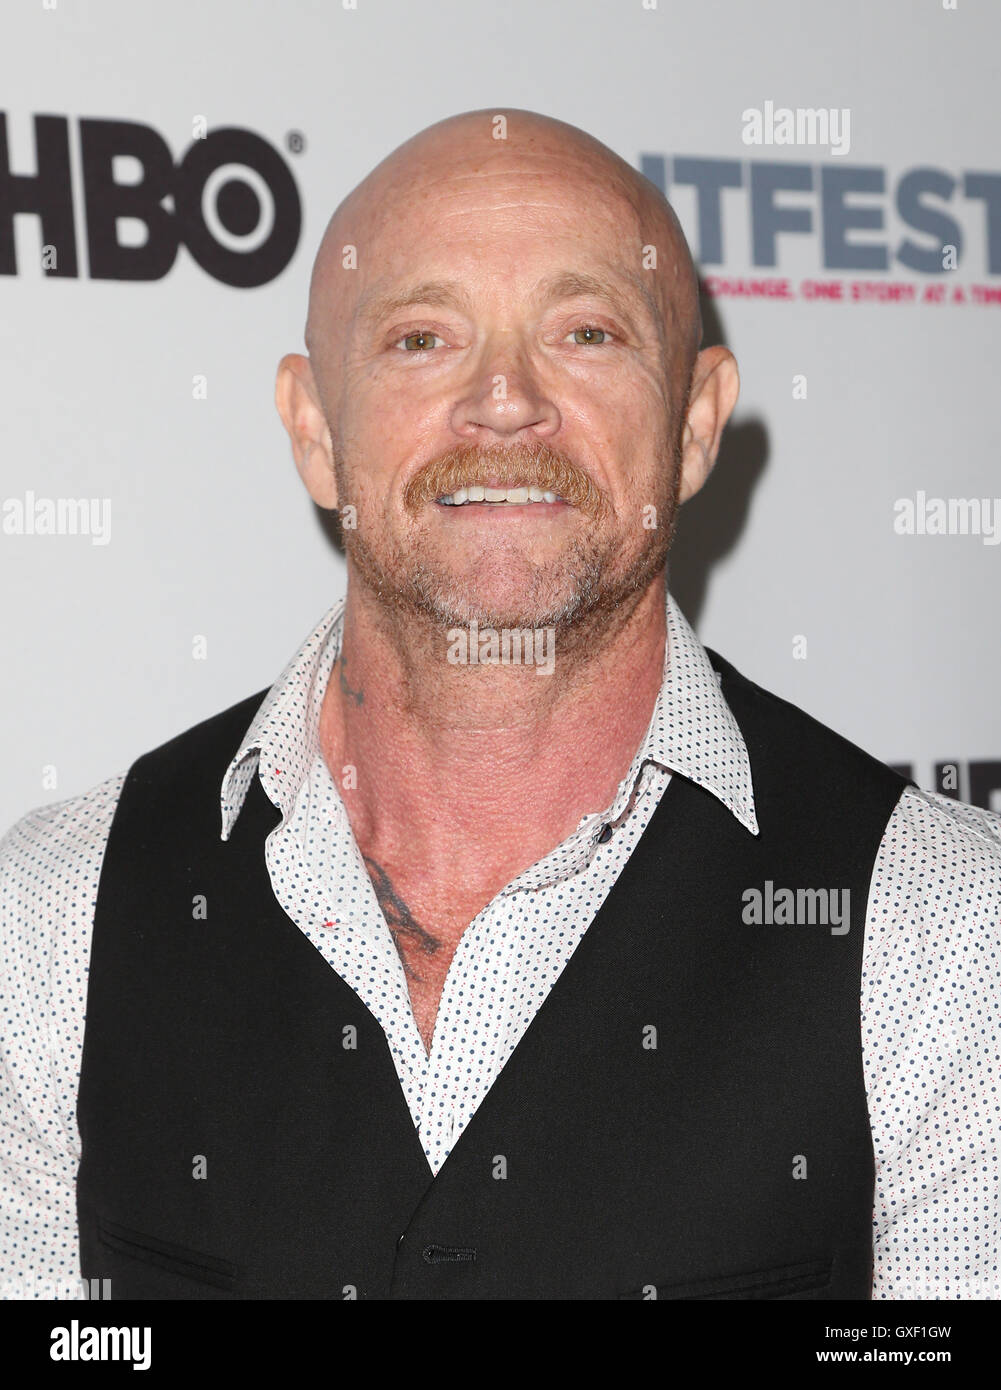 Outfest 2016 Screening Of 'The Trans List'  Featuring: Buck Angel Where: West Hollywood, California, United States When: 16 Jul 2016 Stock Photo